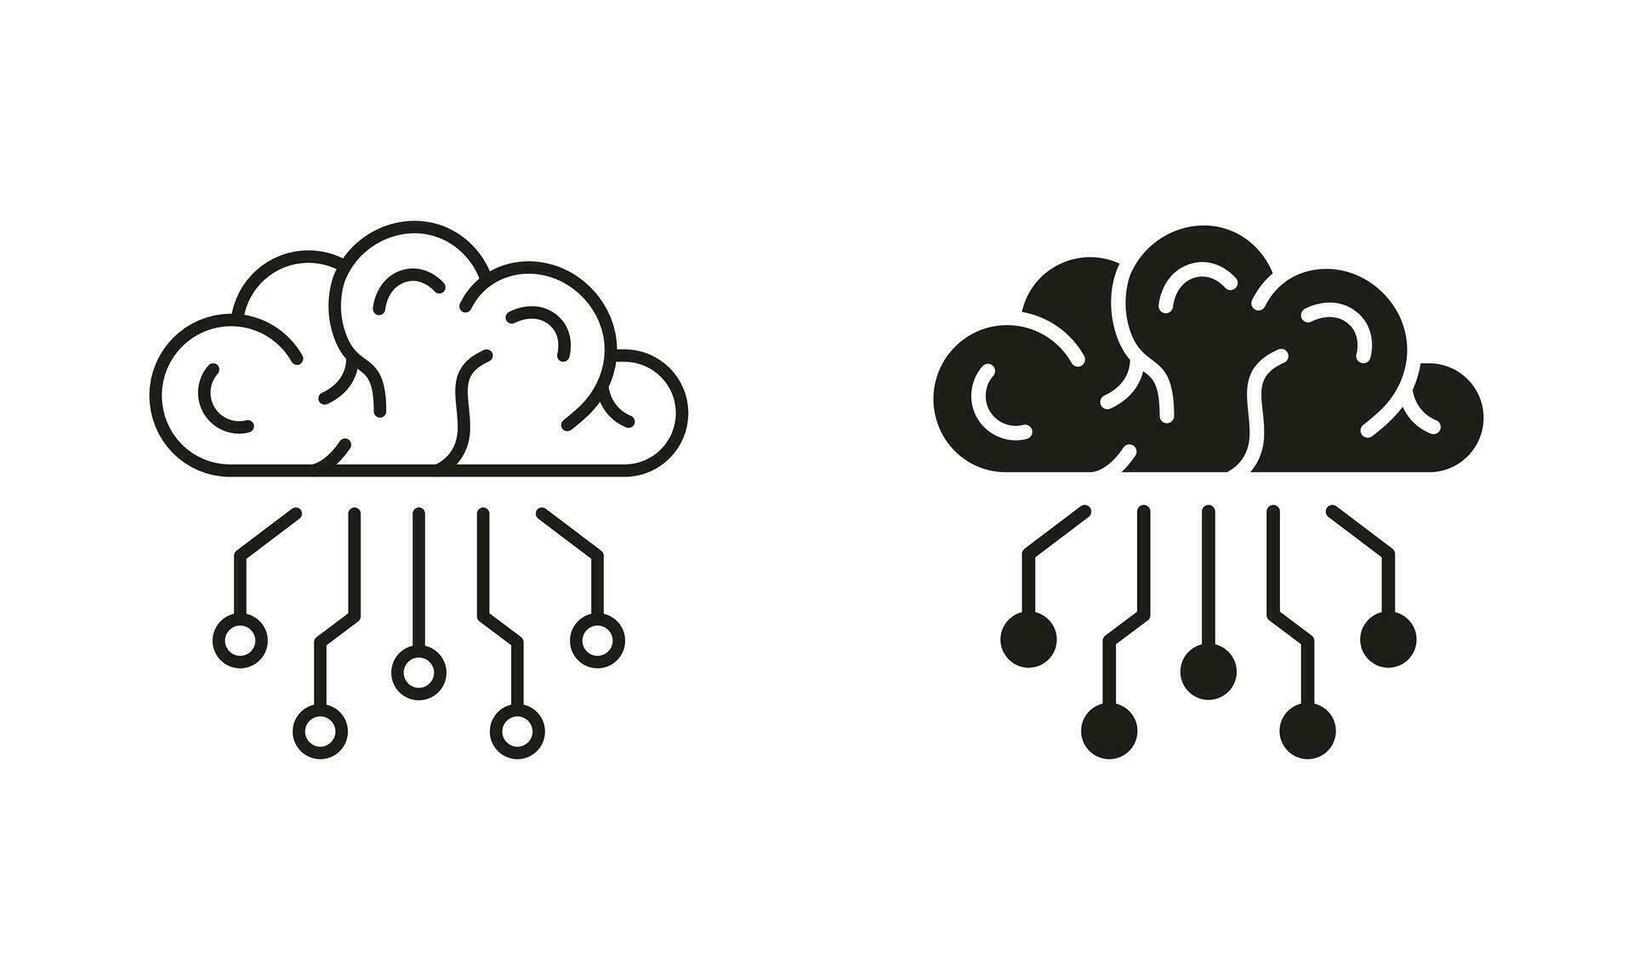 Digital Technology Concept, Human Brain with Circuit Silhouette and Line Icons Set. Tech Science Black Symbol Collection. Artificial Intelligence Pictogram. Isolated Vector Illustration.